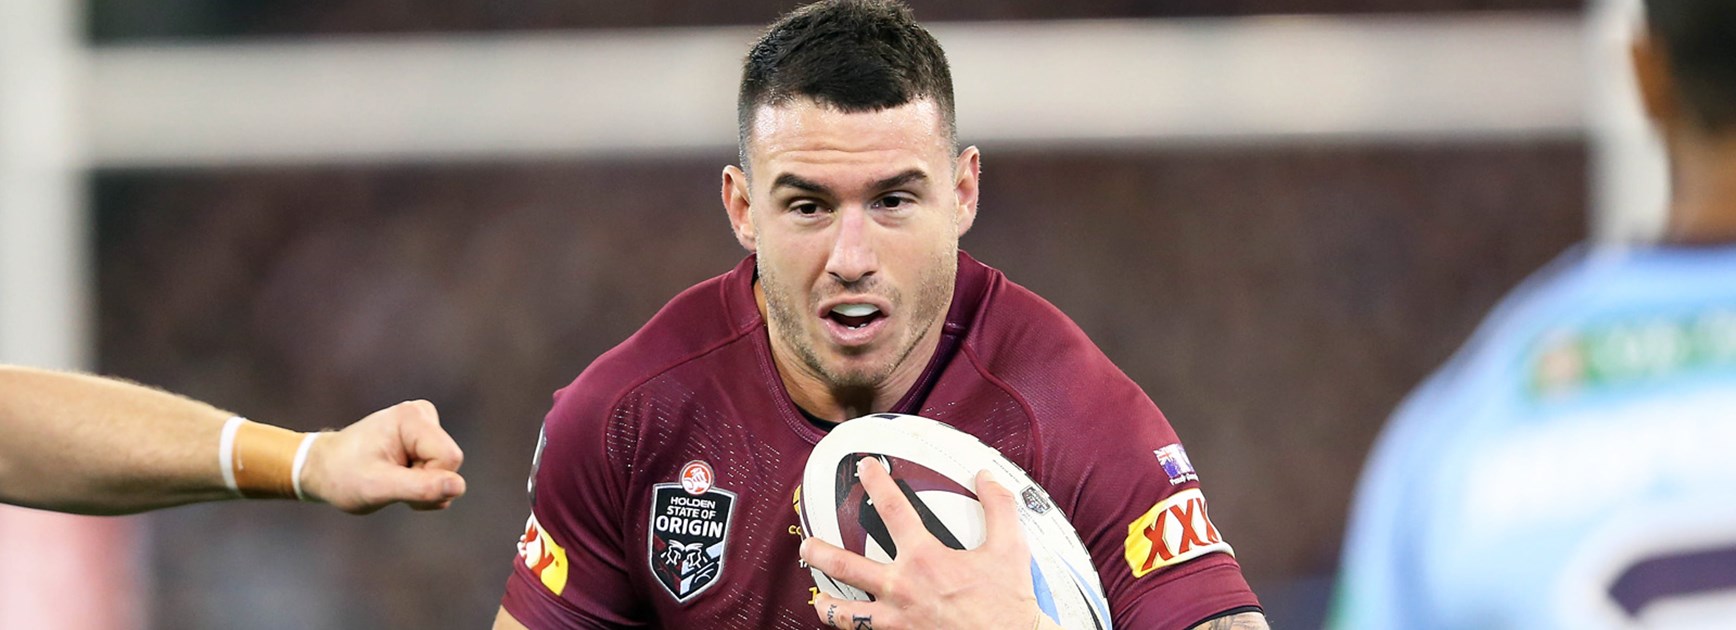 Maroons winger Darius Boyd has ambitions of playing fullback for Queensland before he retires.